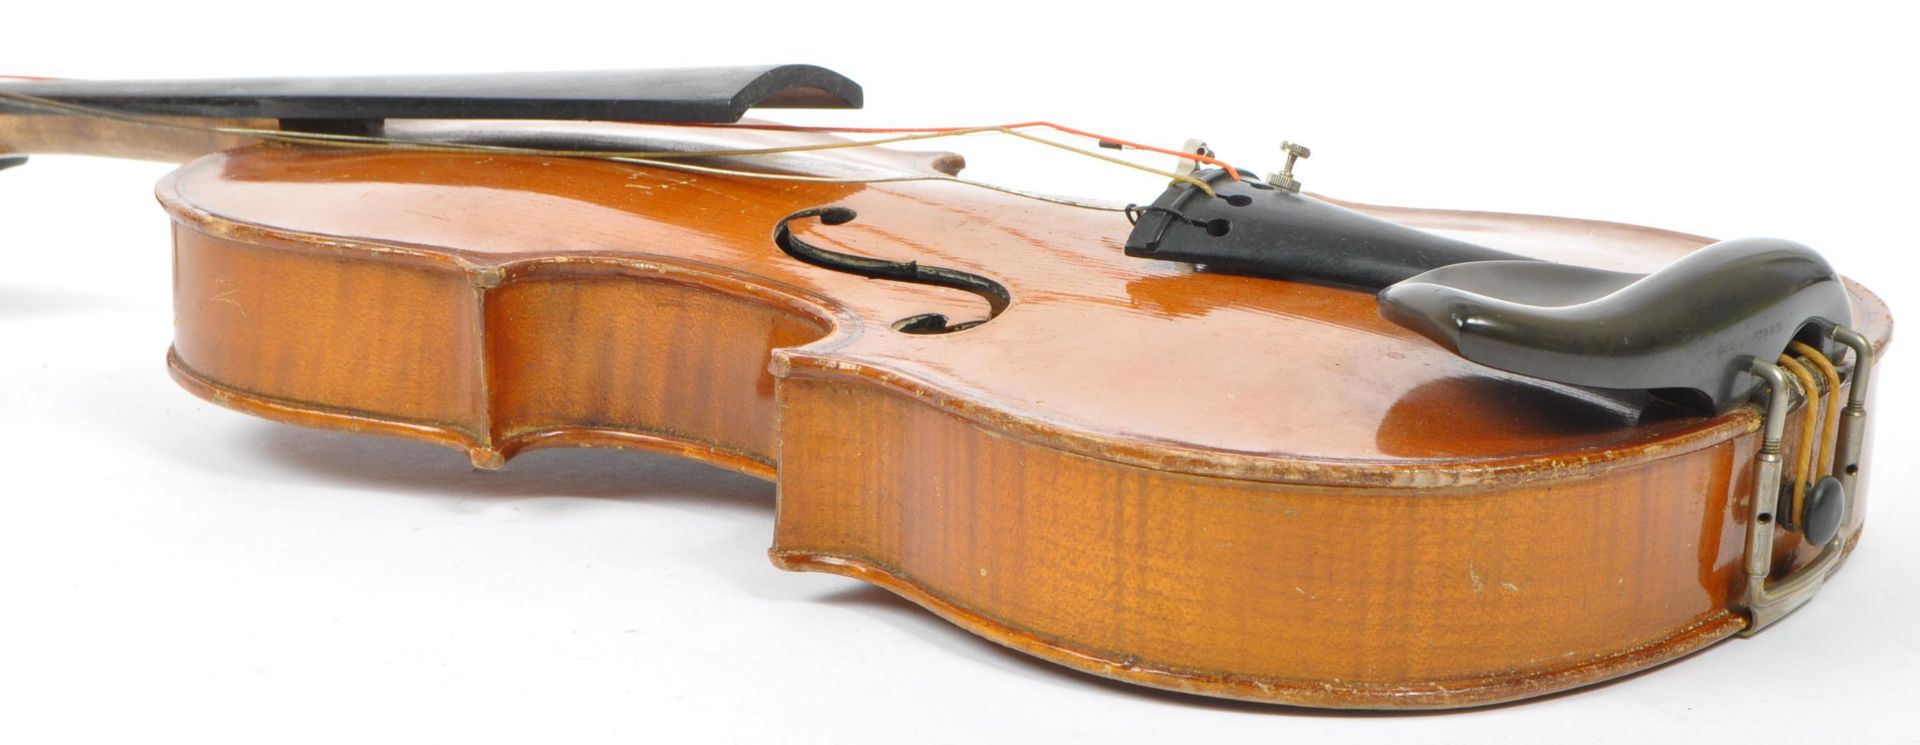 EARLY 20TH CENTURY GERMAN VIOLIN LABELLED D.R.G.M 728940 - Image 6 of 10